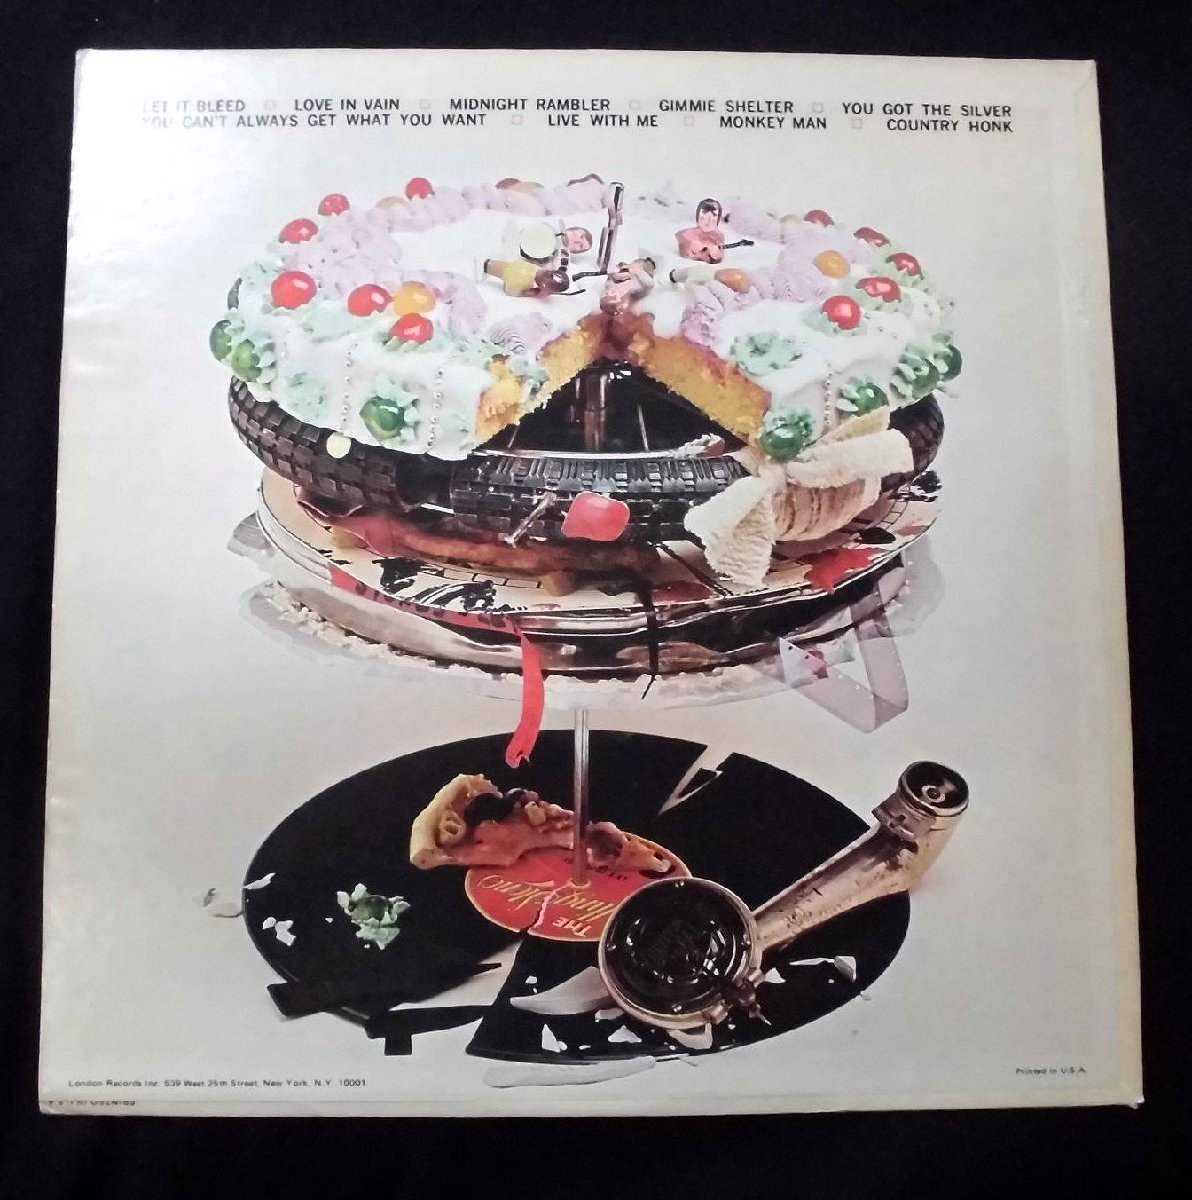 ●US-London Recordsオリジナルw/Poster!! Rolling Stones / Let It Bleed_画像2